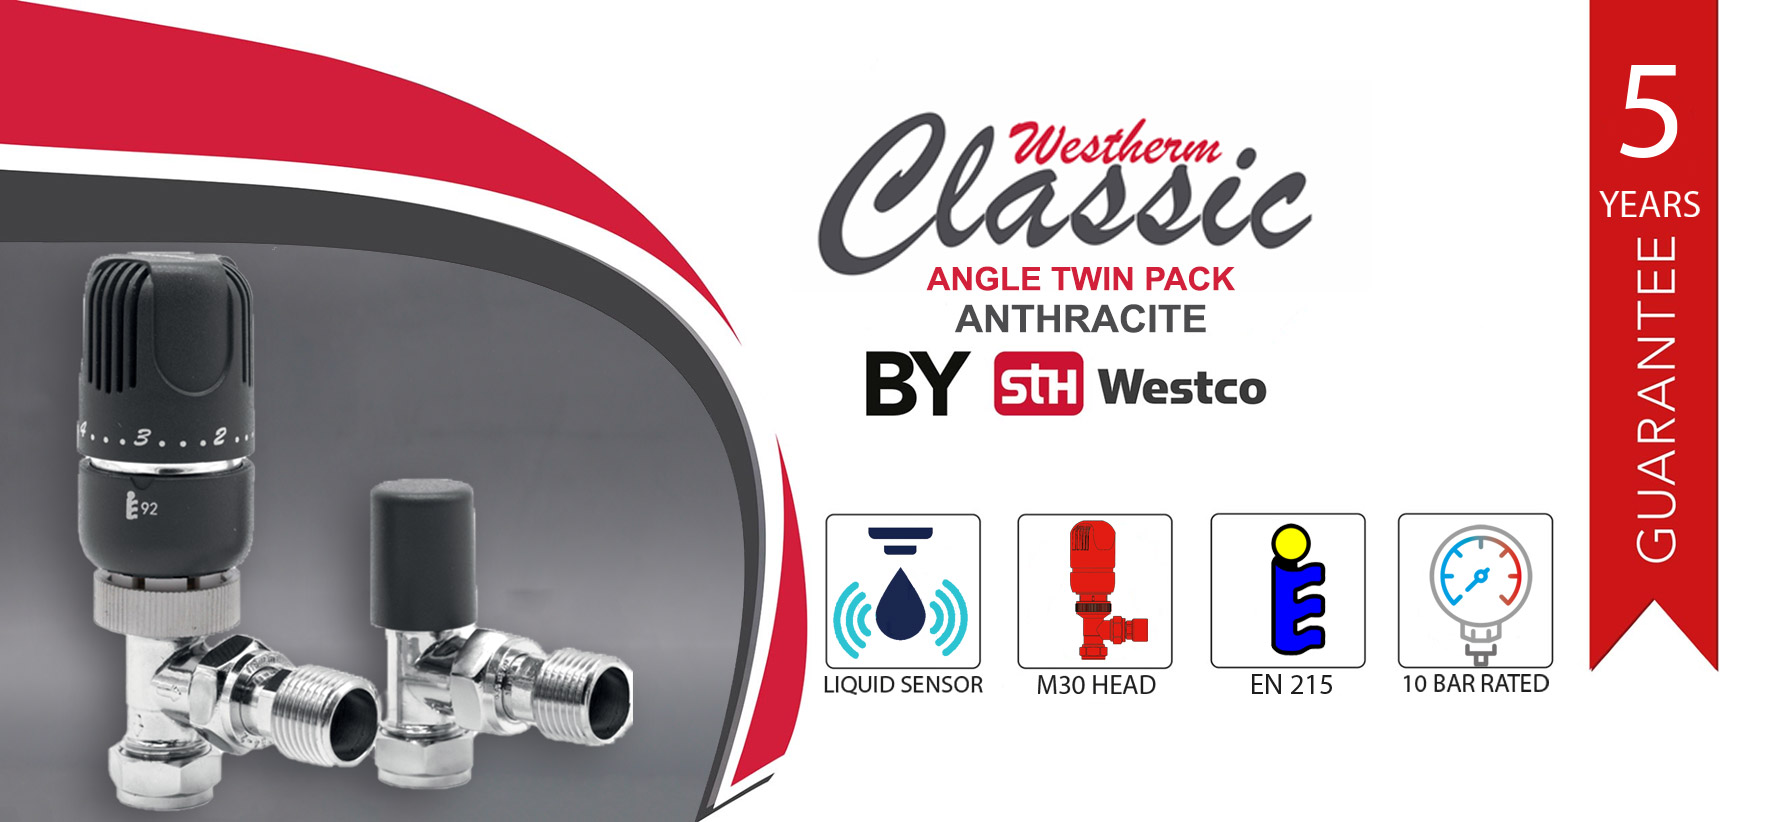 Westherm Classic Angle Twin Pack Anthracite